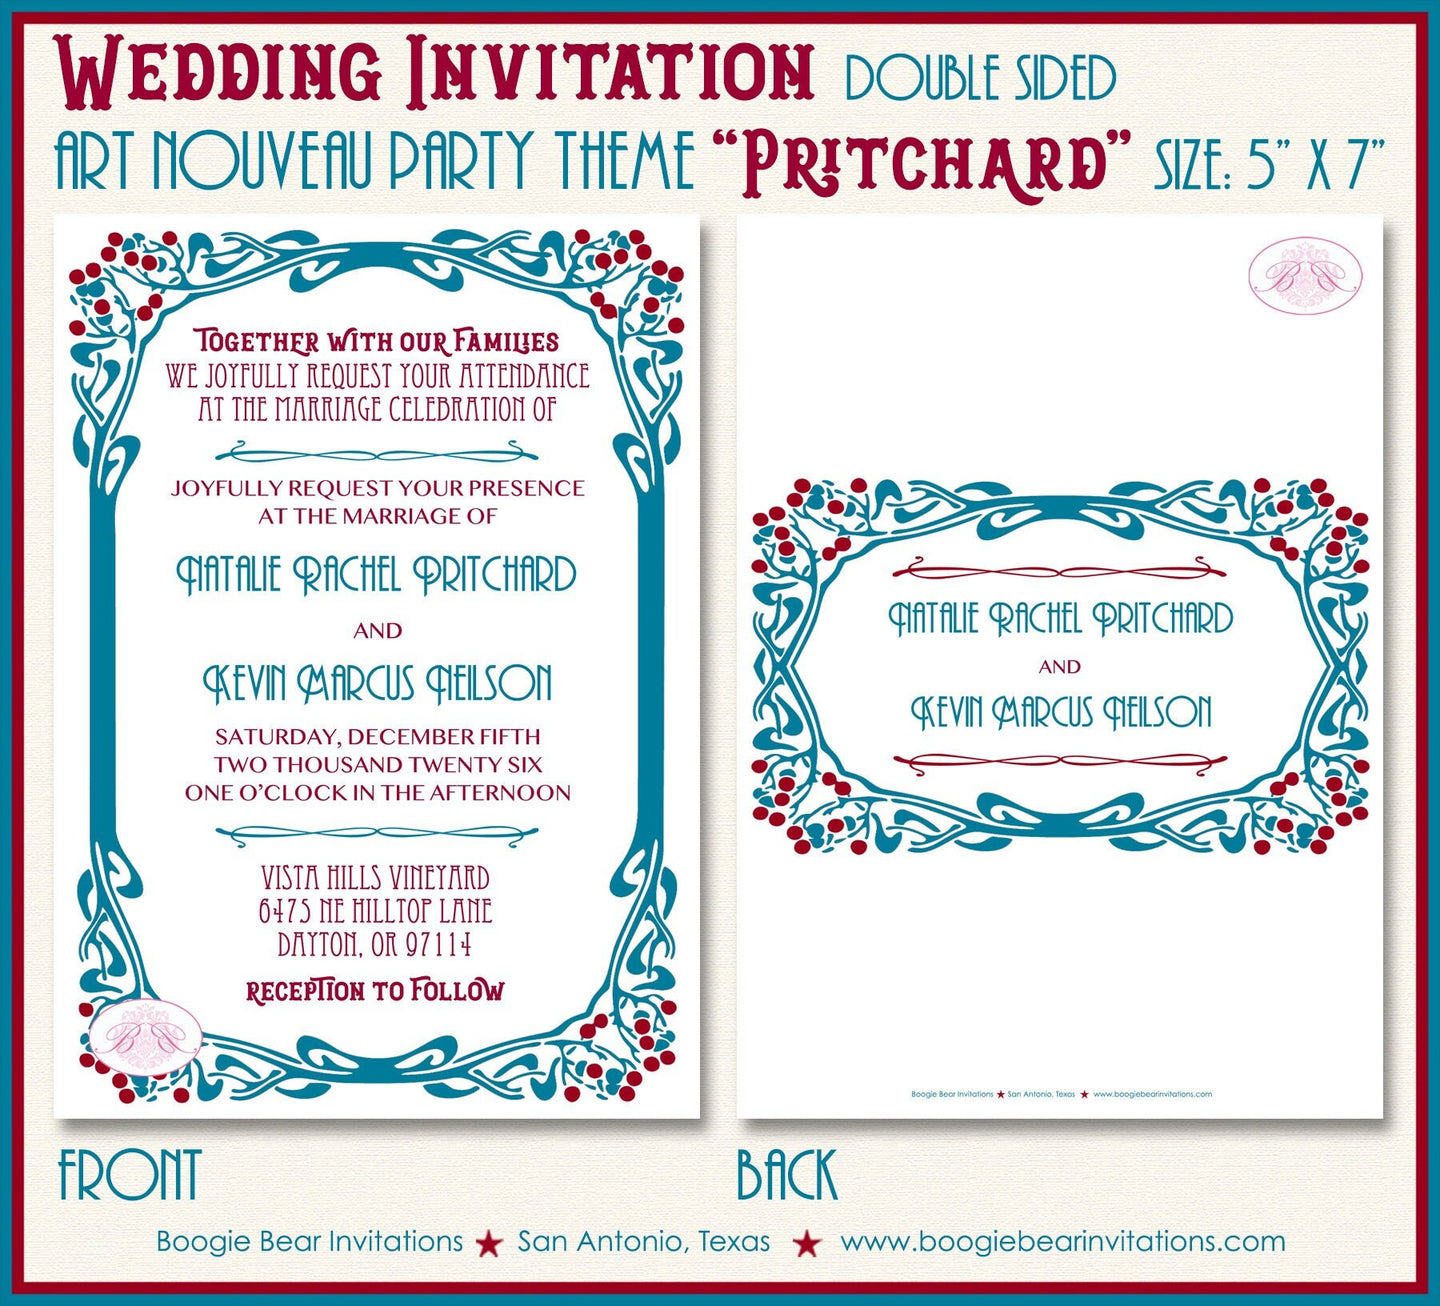 Art Nouveau Wedding Invitation Party Red White Blue Modern Retro Berry Boogie Bear Invitations Pritchard Theme Paperless Printable Printed